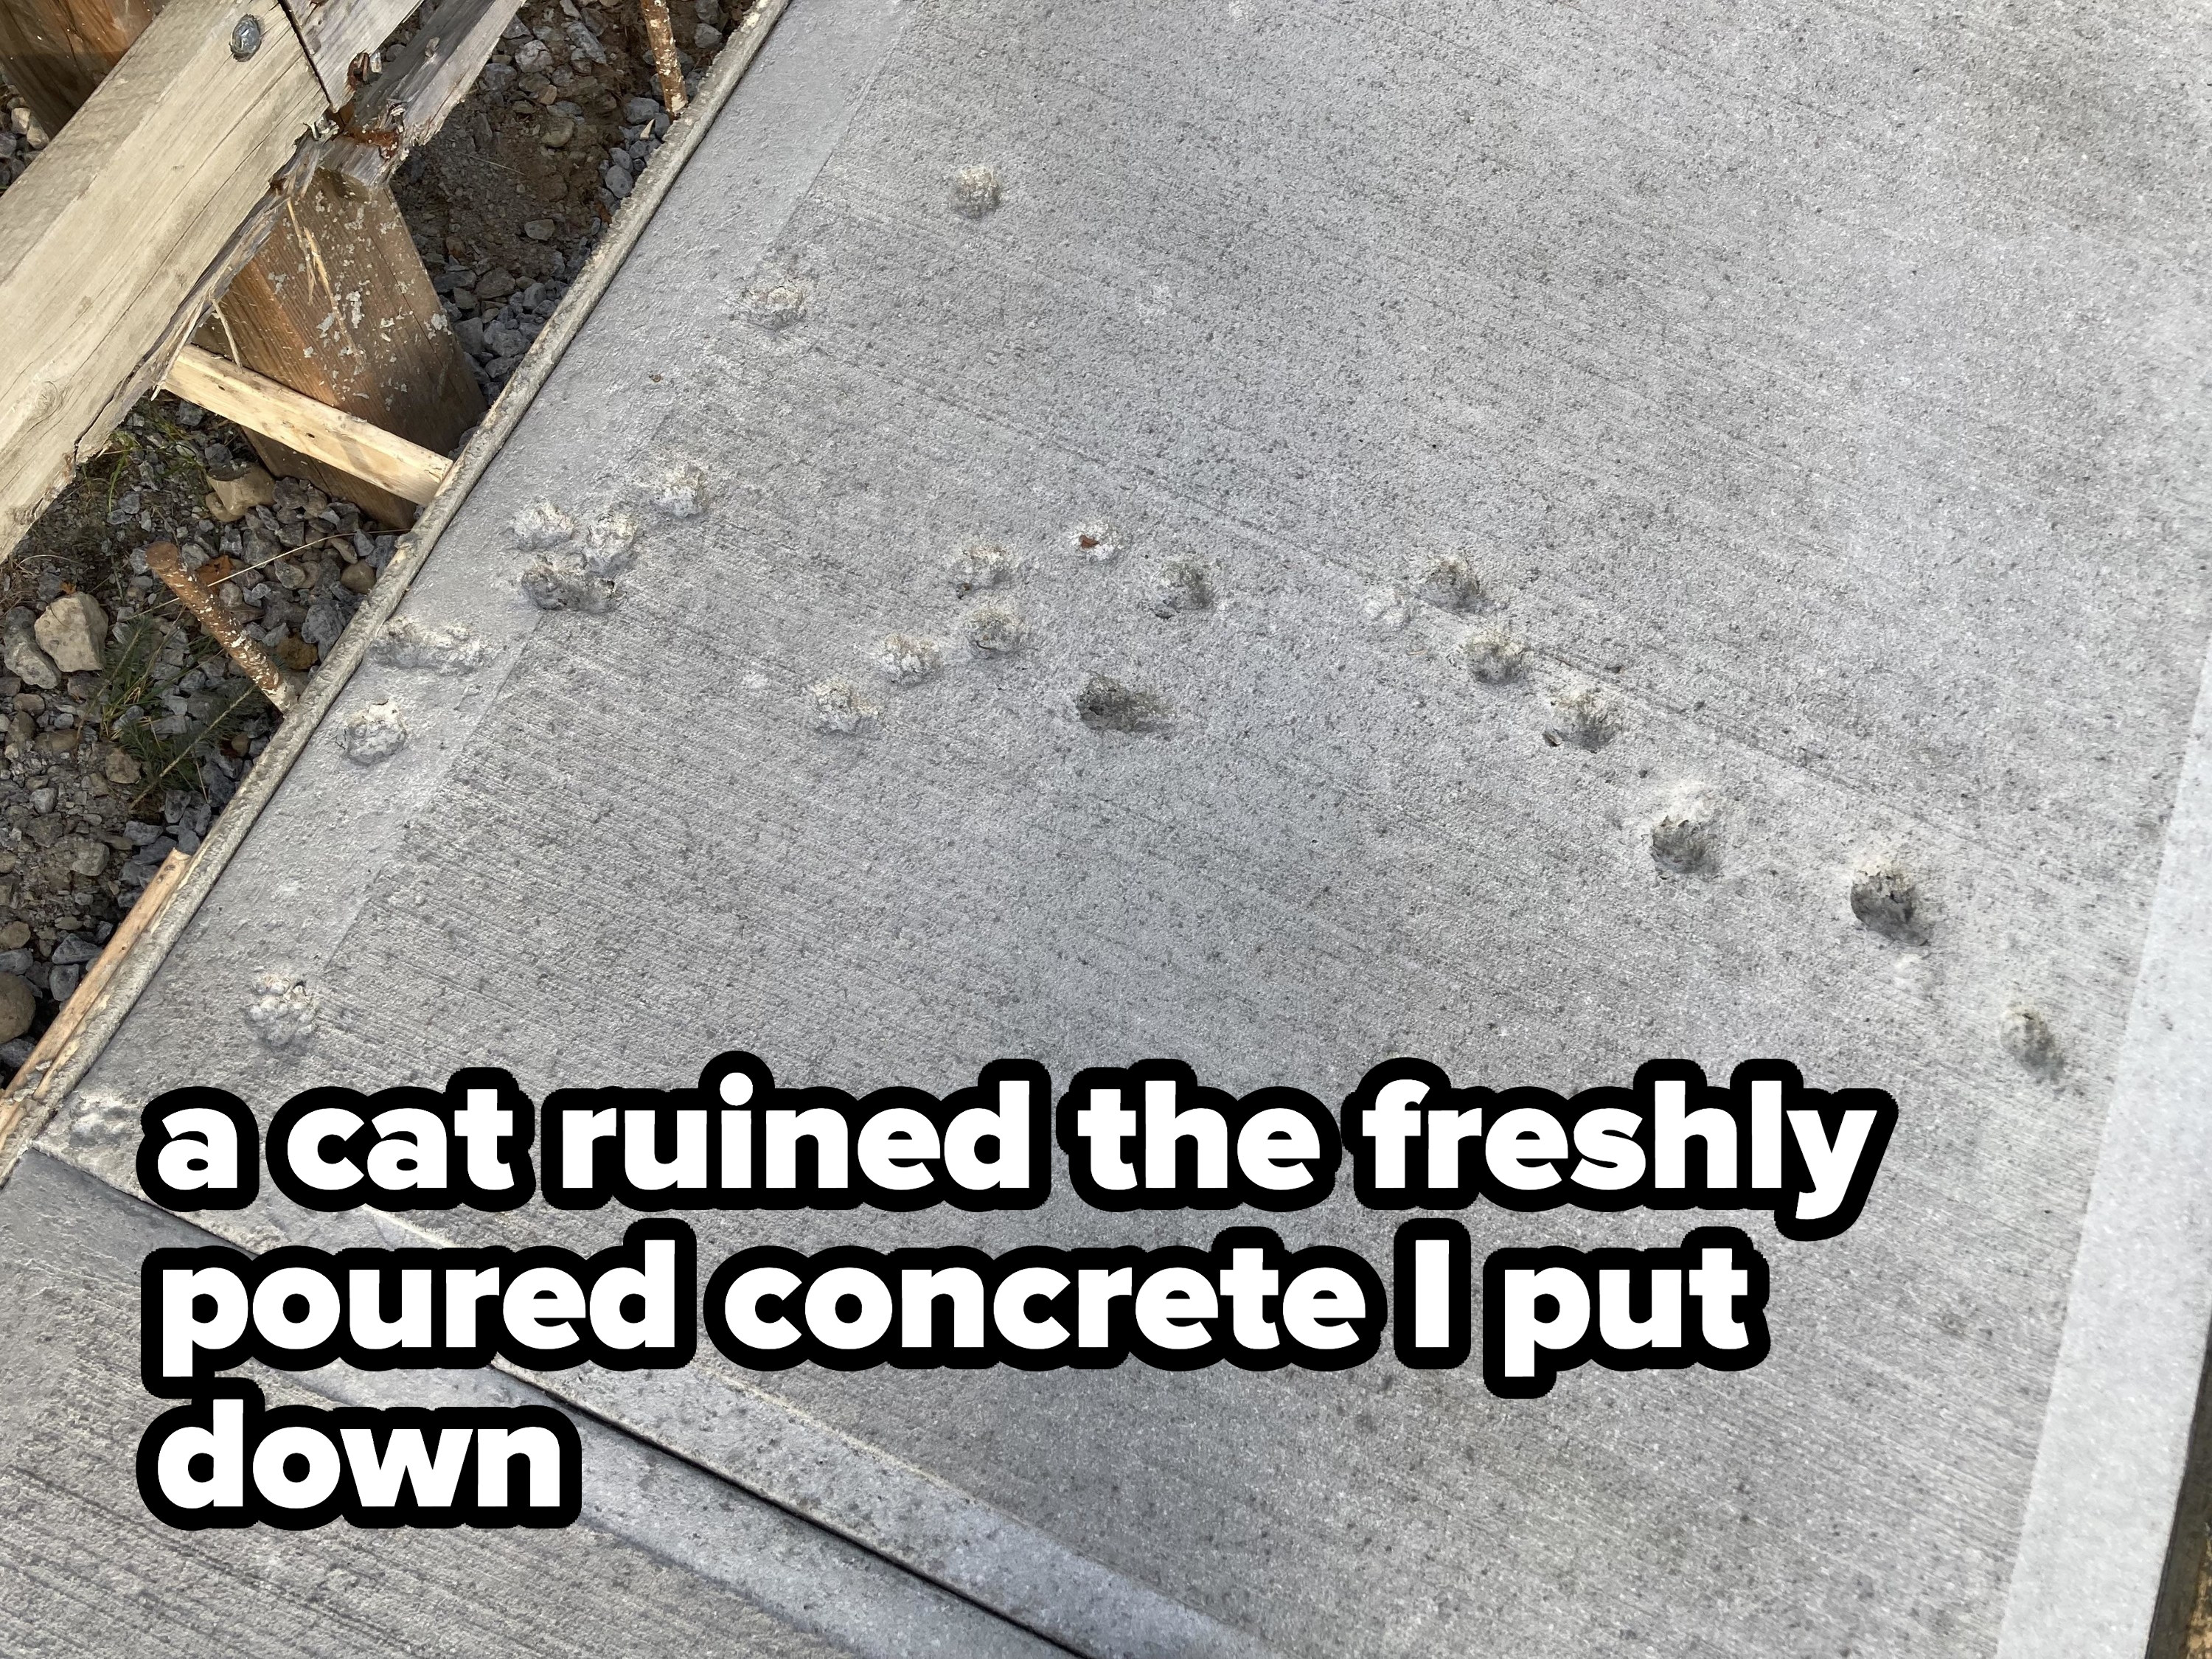 Freshly poured concrete with cat prints